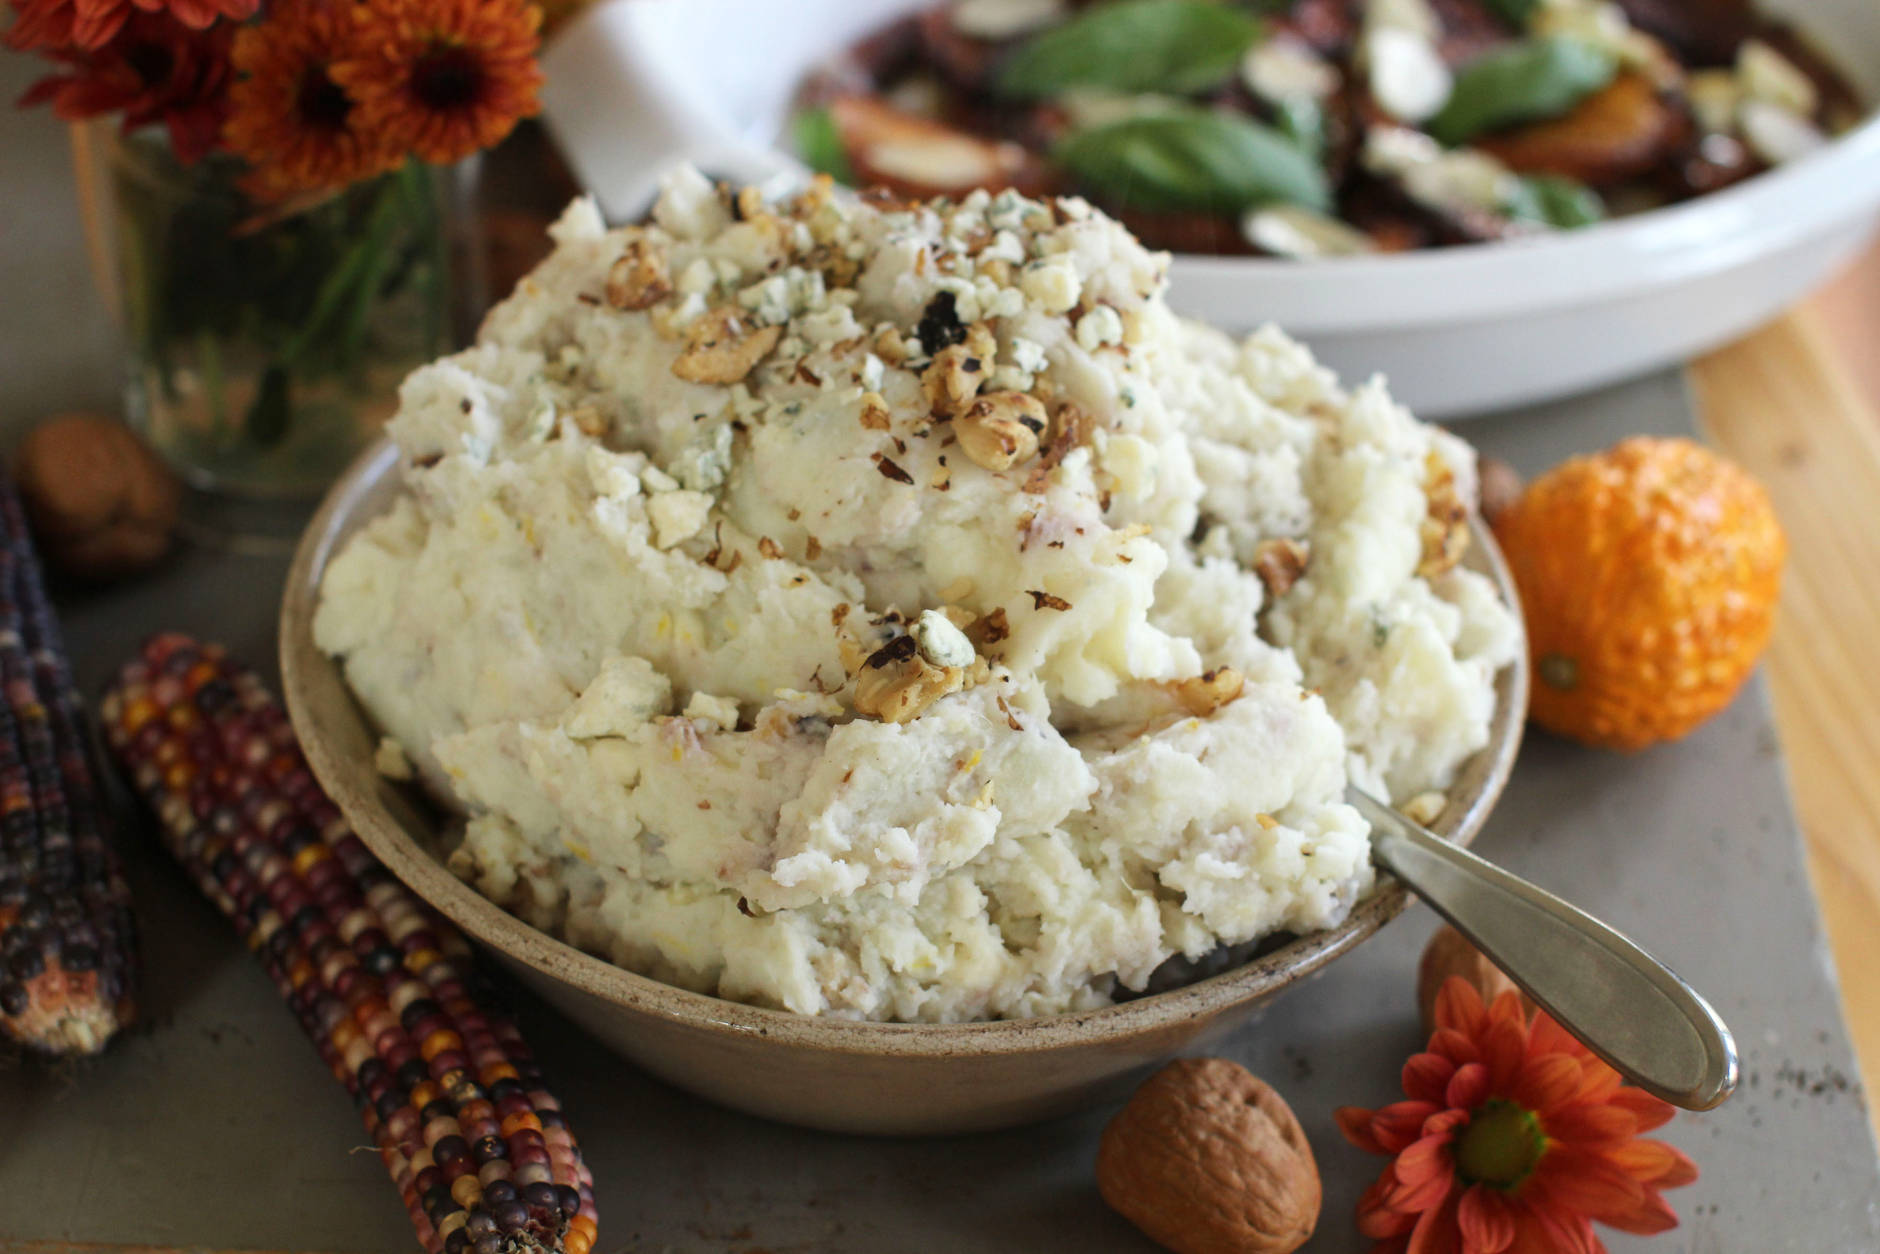 This Oct. 5, 2015 photo  shows blue walnut mashed potatoes in Concord, NH. We started by creating a master recipe for basic, buttery-creamy mashed potatoes that are delicious just as they are. (AP Photo/Matthew Mead)